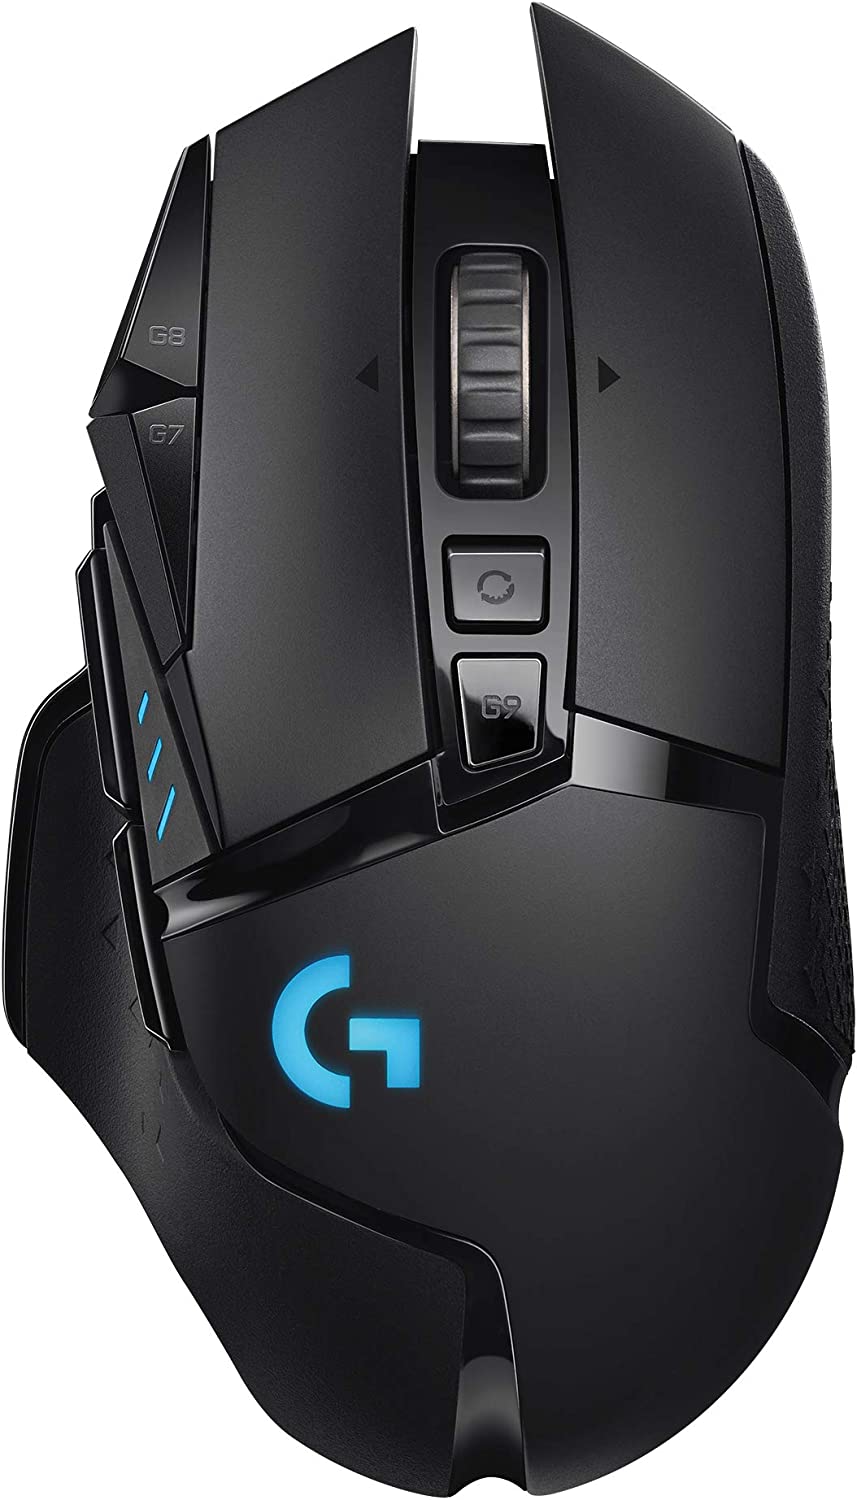 The Best Gaming Mouse: A Comprehensive Product Review